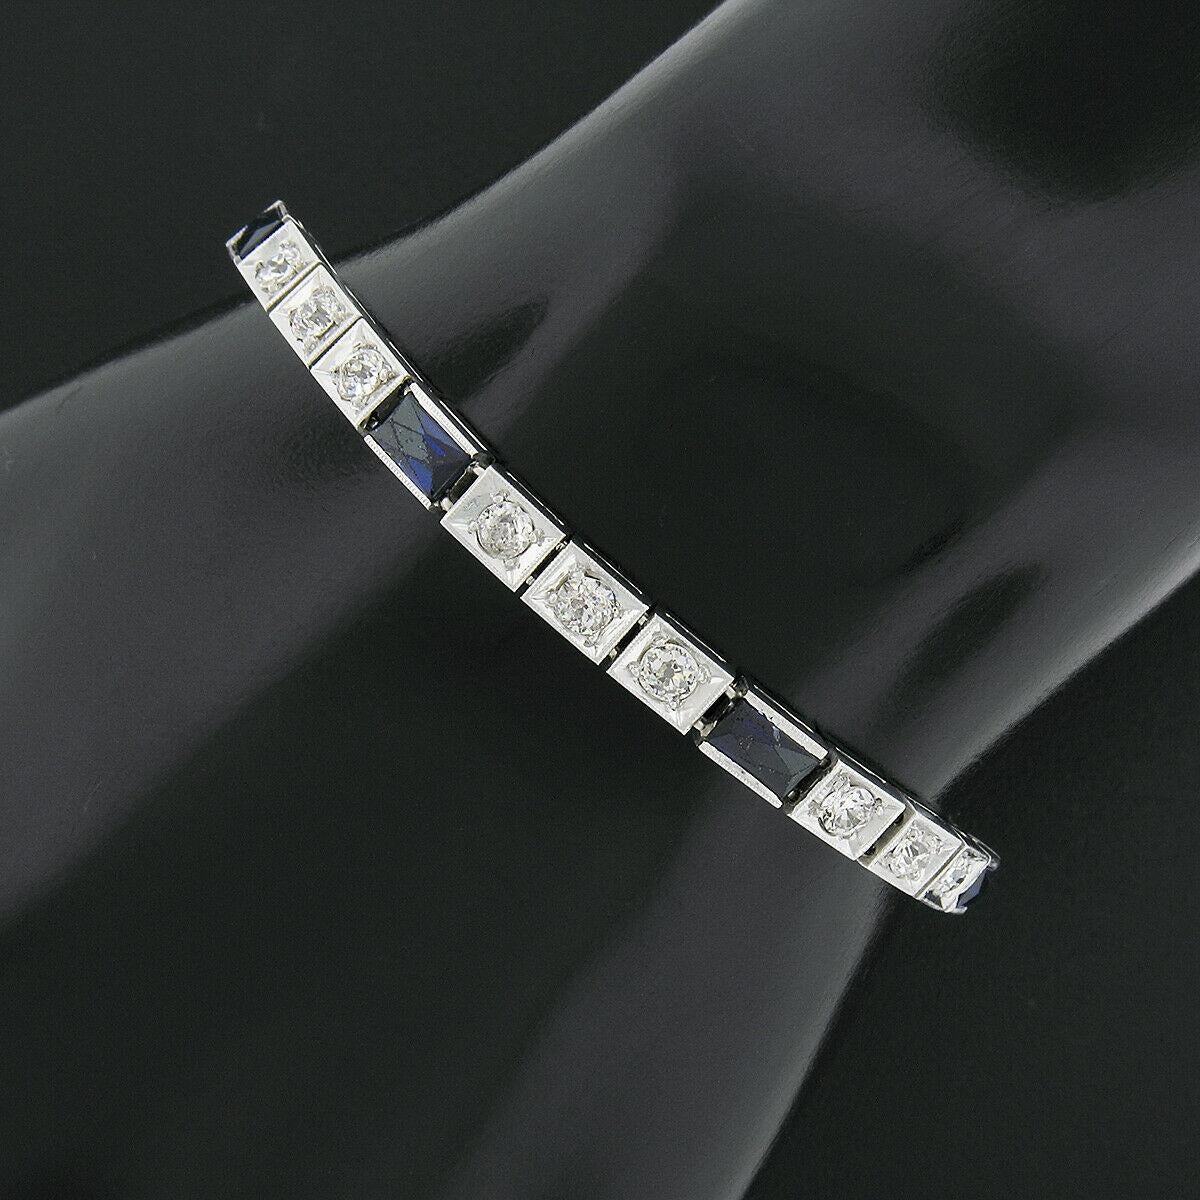 Here we have a gorgeous antique line bracelet crafted from solid 18k white gold during the art deco period. It features trios of bead set old European cut diamonds separated by channel set rectangular French cut synthetic sapphires. The 18 diamonds